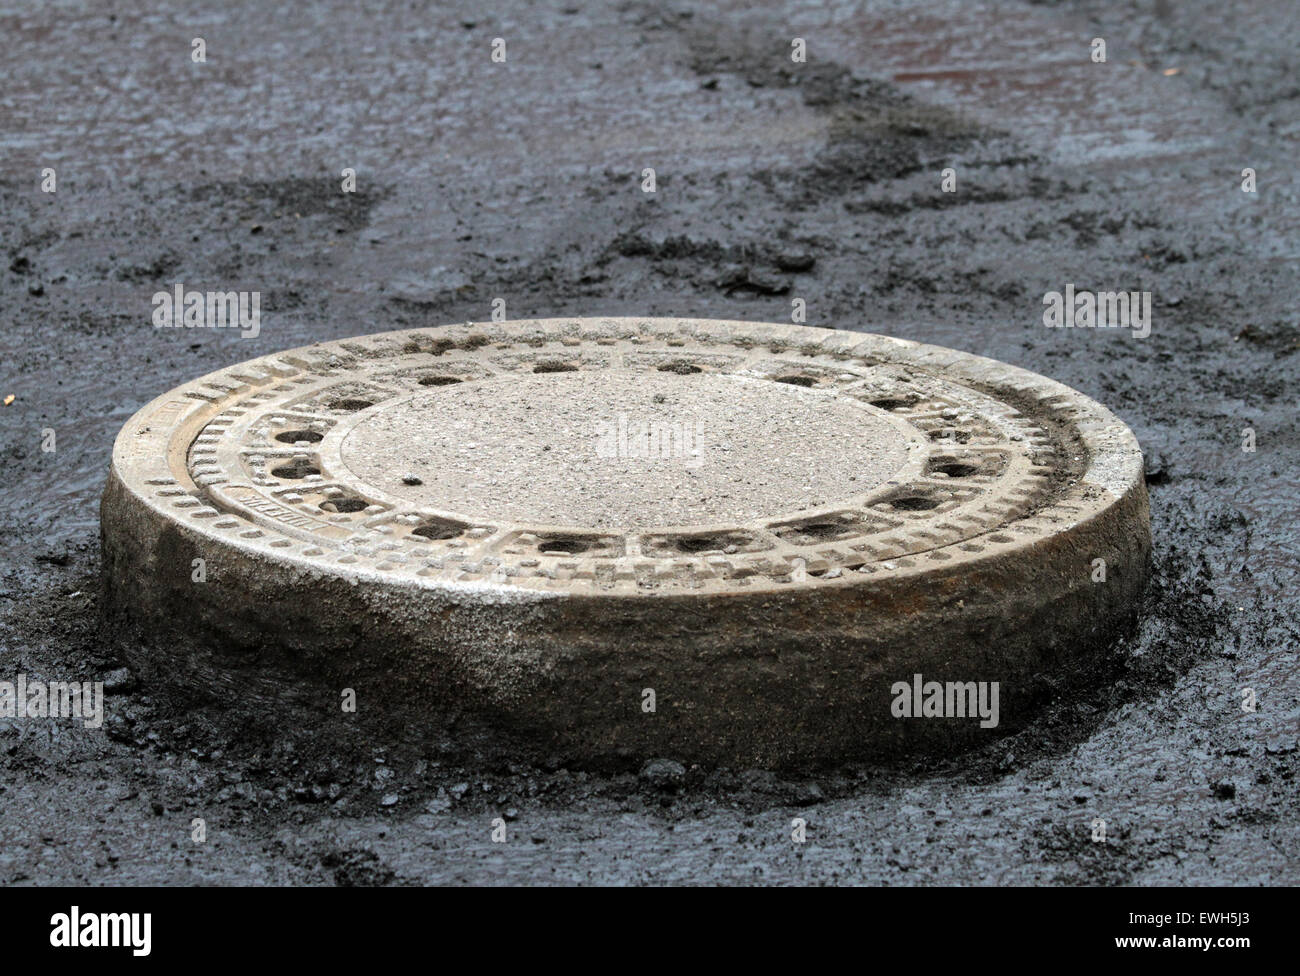 Berlin, Germany, at road works exposed manhole covers Stock Photo